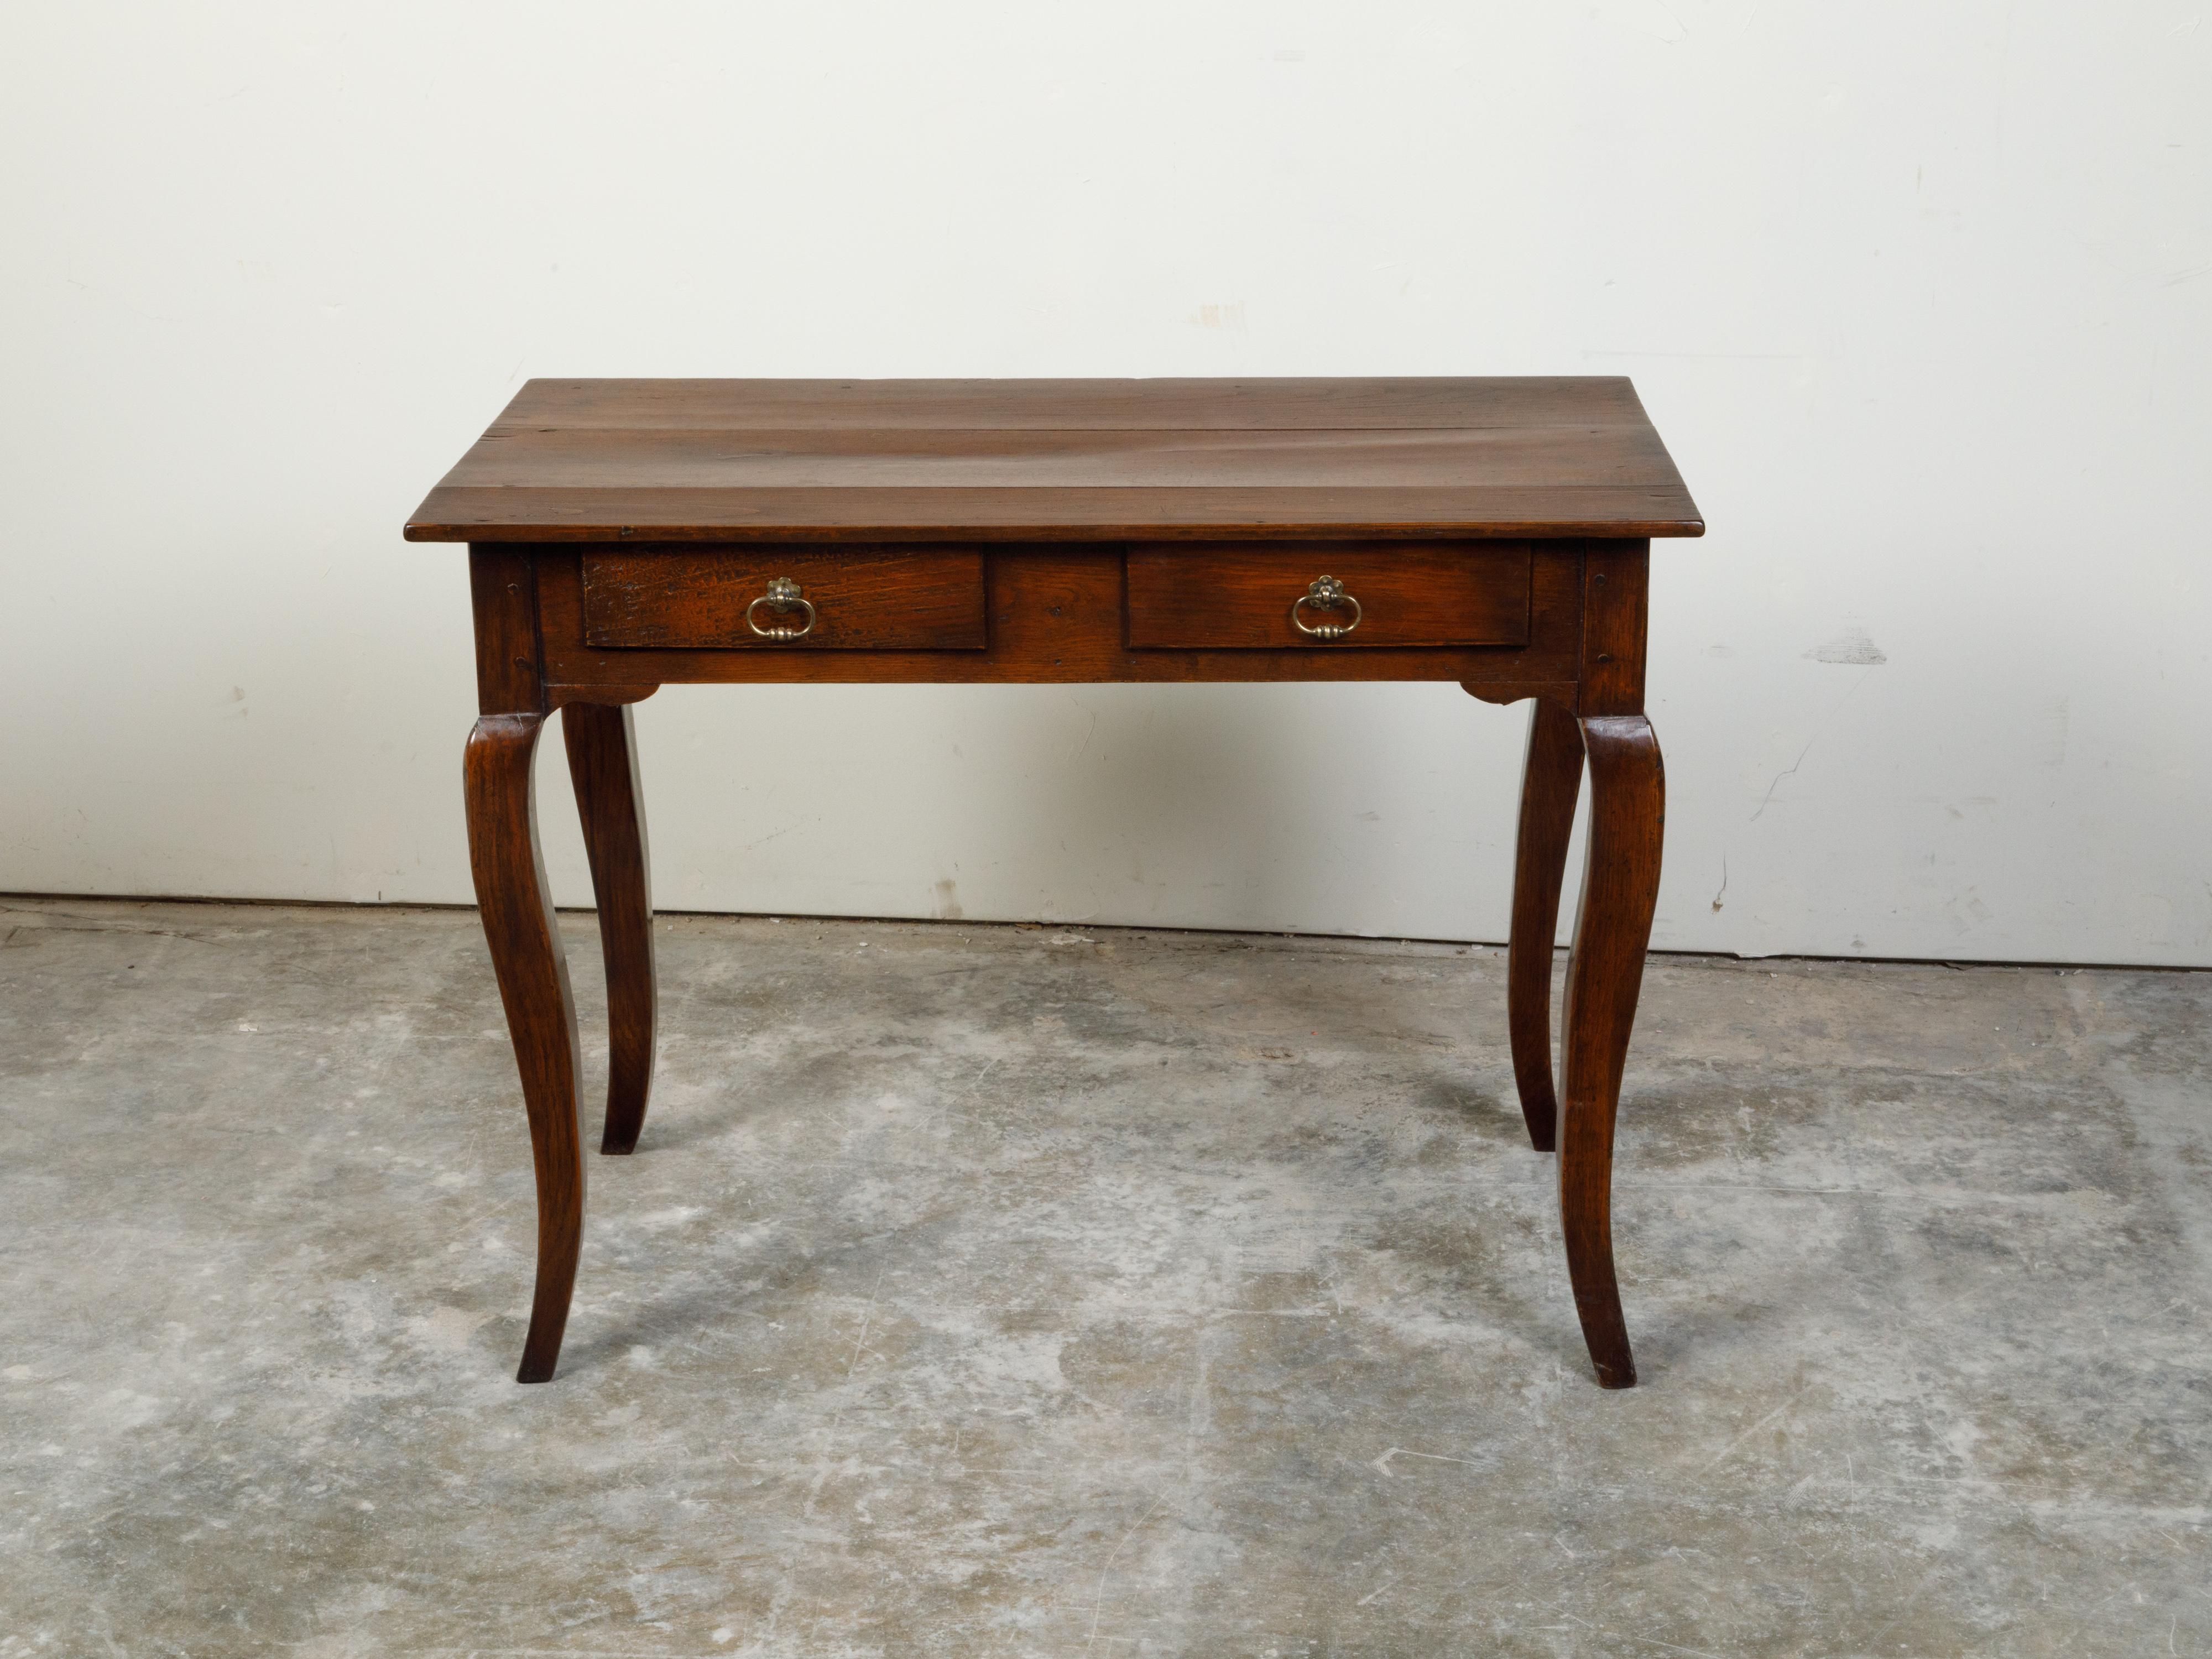 A French Louis XV style walnut desk from the 19th century, with two drawers and cabriole legs. Created in France during the 19th century, this walnut desk features a rectangular planked top sitting above two drawers fitted with bronze pulls on